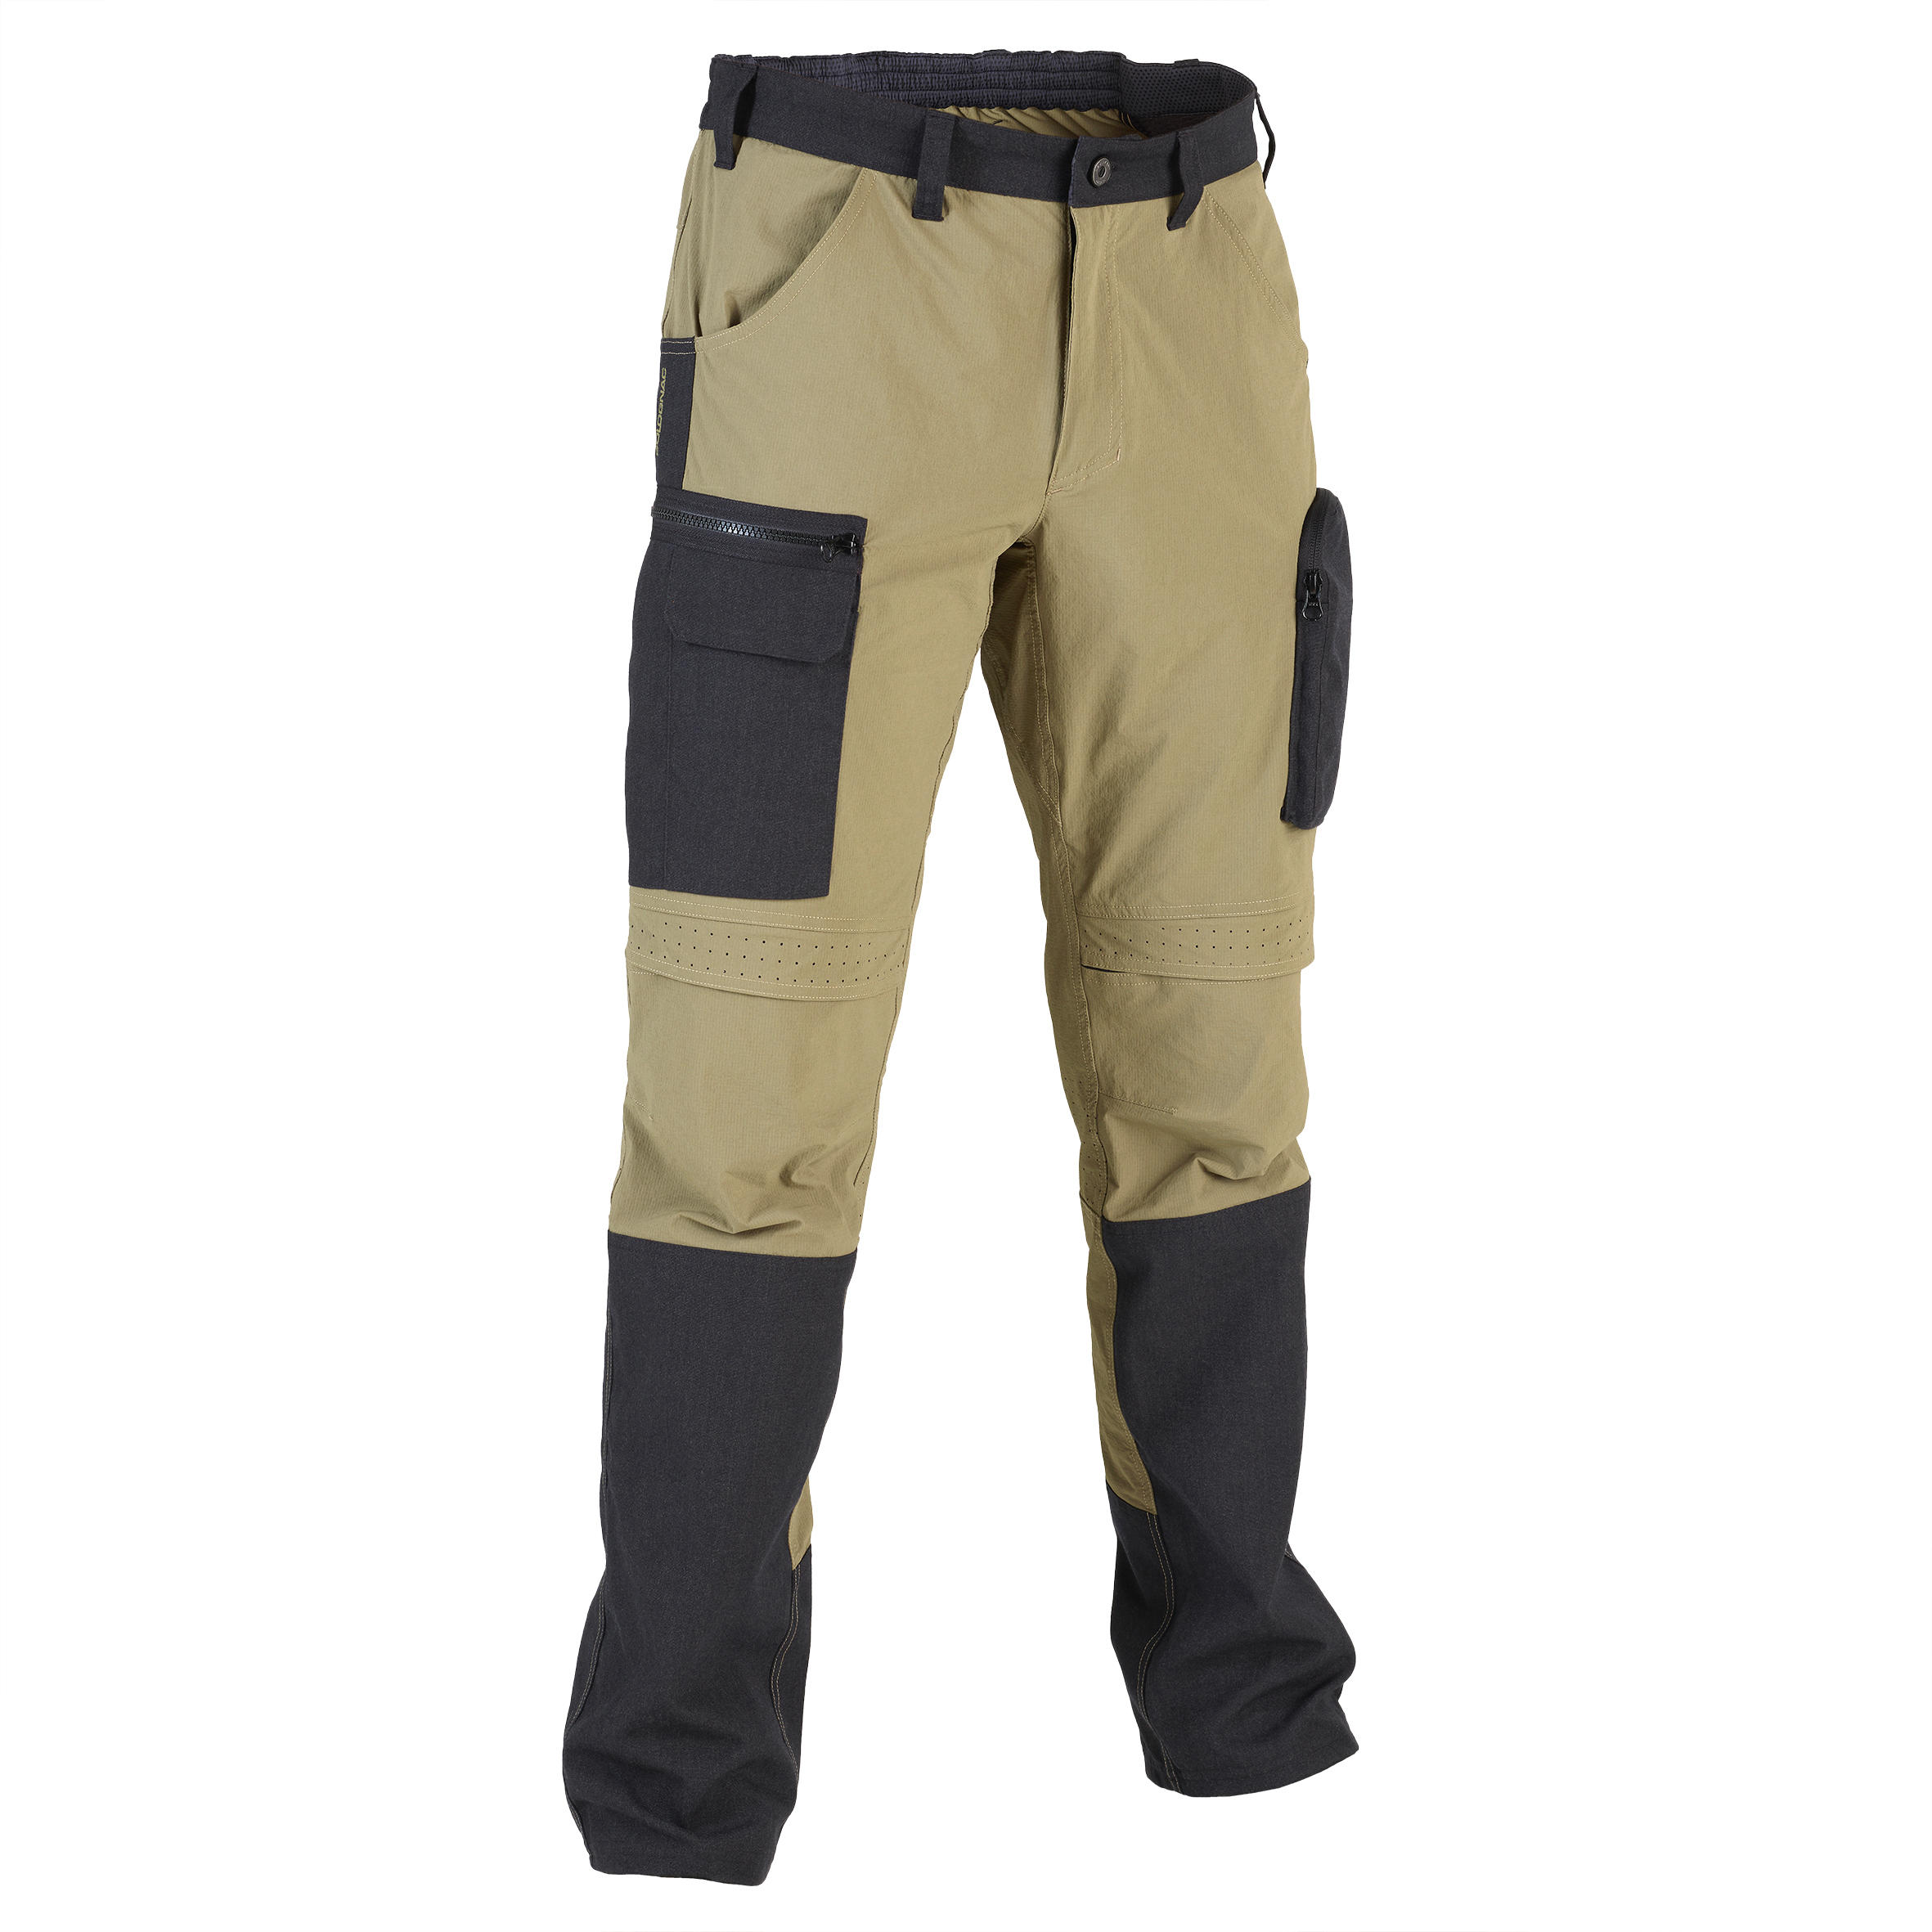 Lightweight Breathable Trousers - Light Green 1/6